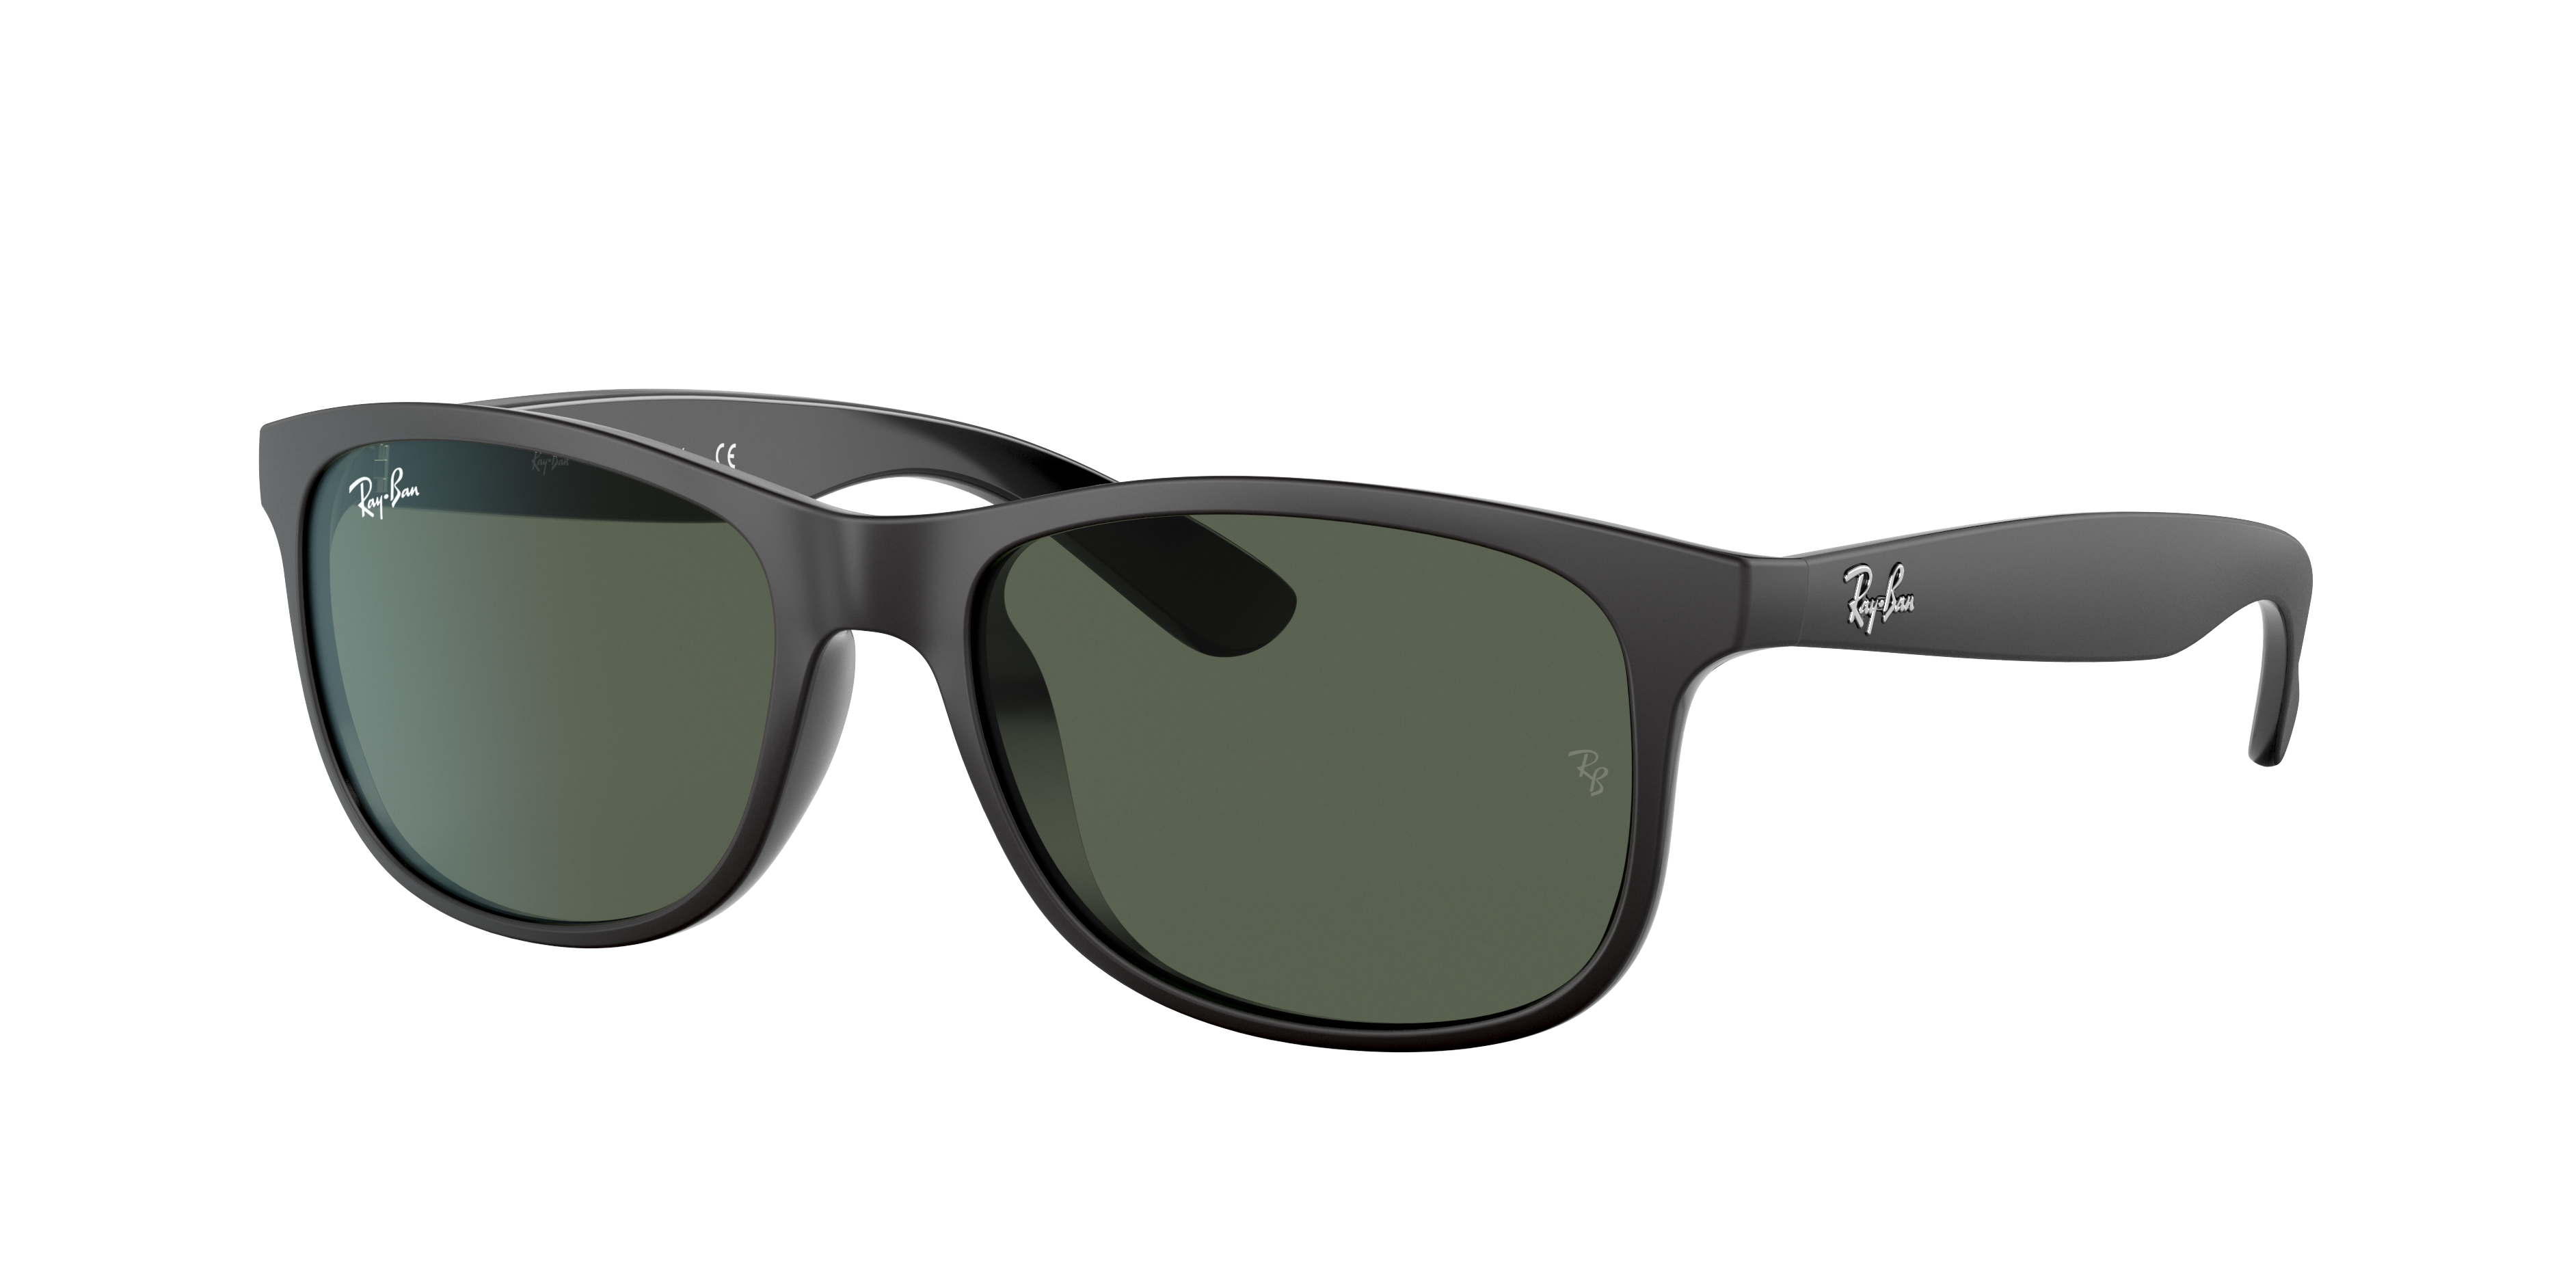 Ray-Ban 0RB4202 in Matte Black 